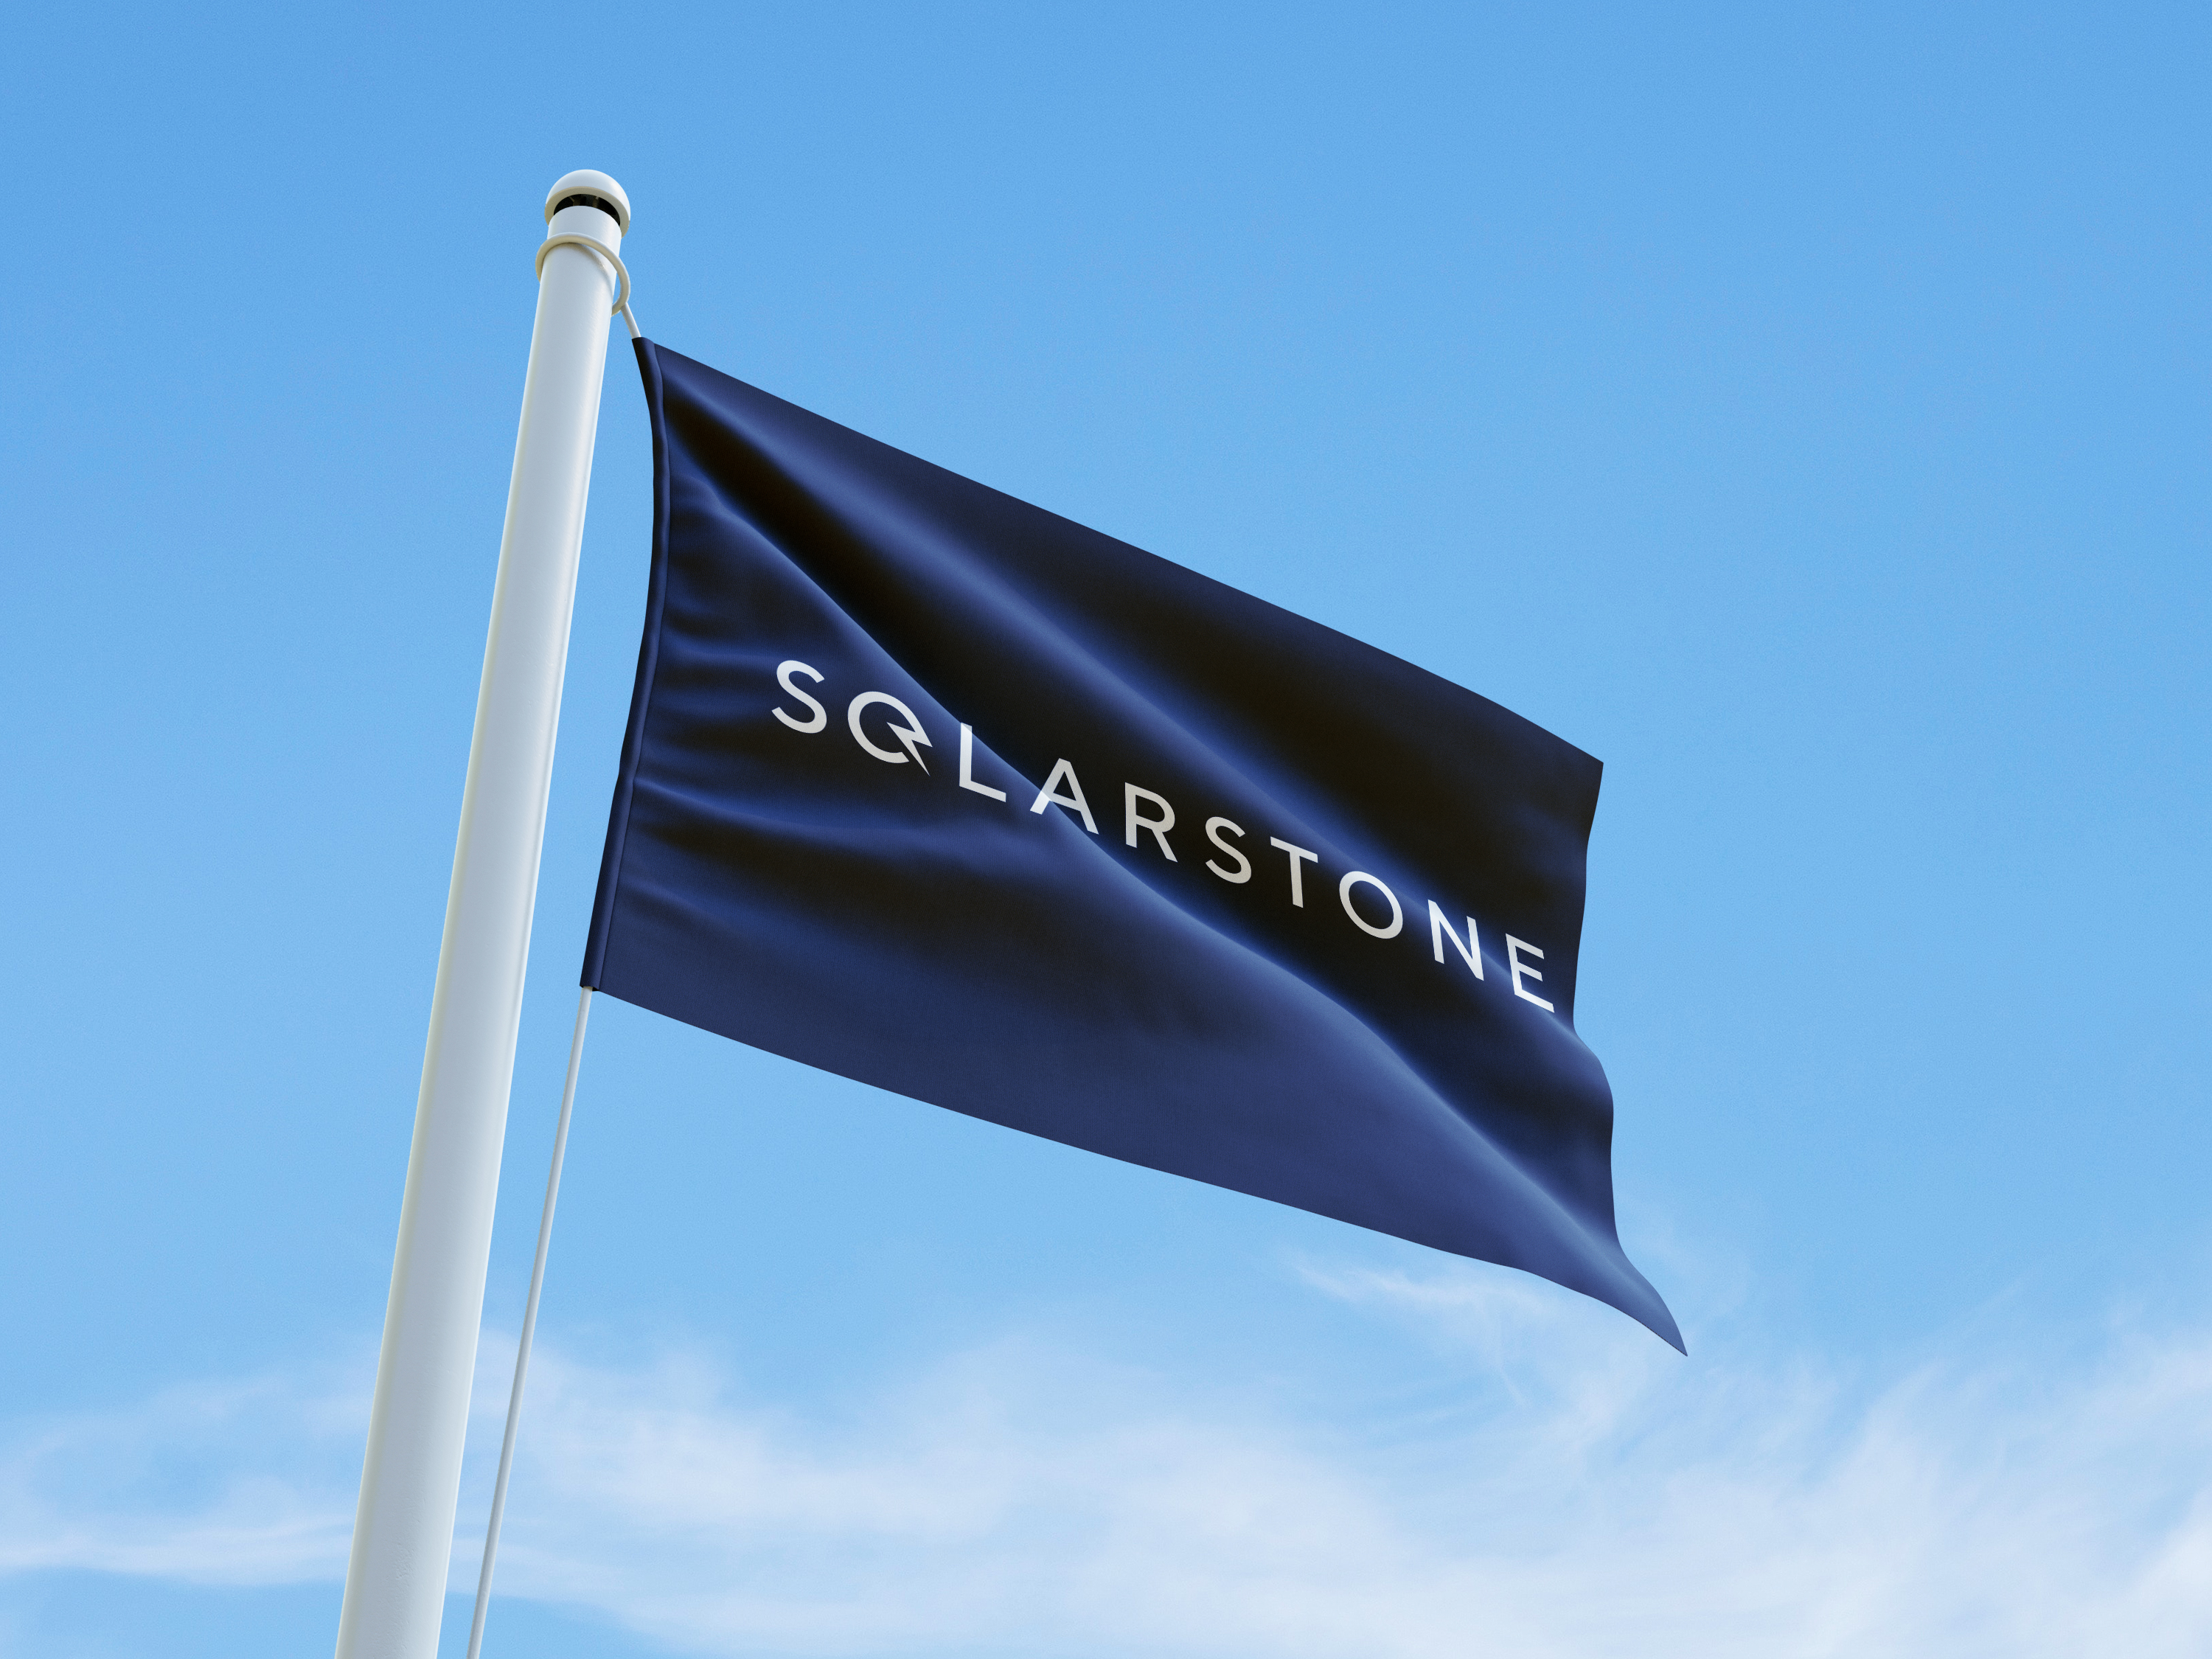 Blue flag waving with a white Solarstone logo on it